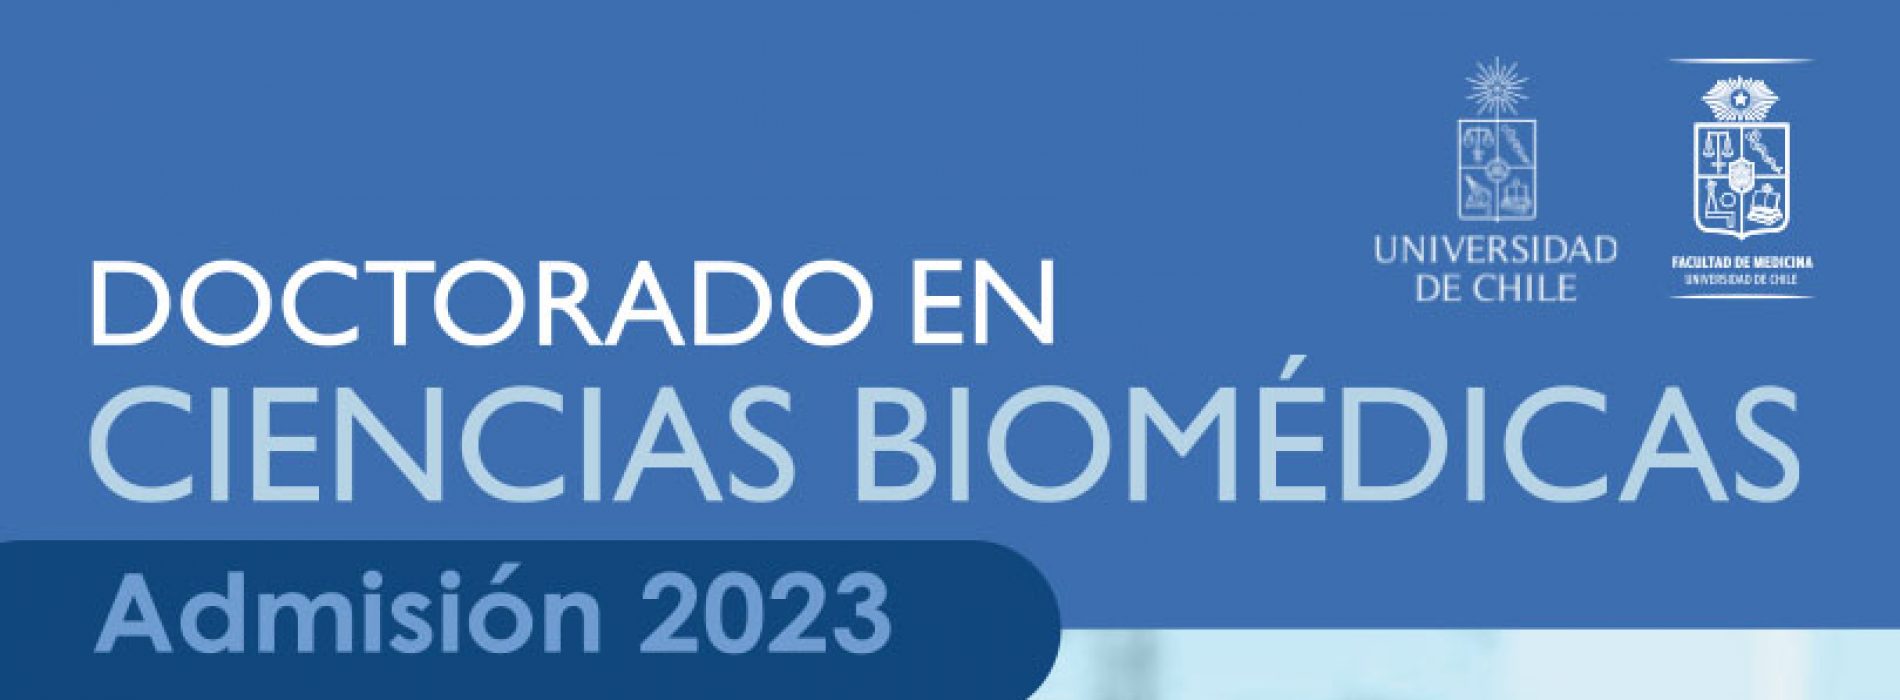 DOCTORATE IN BIOMEDICAL SCIENCES, admission 2023